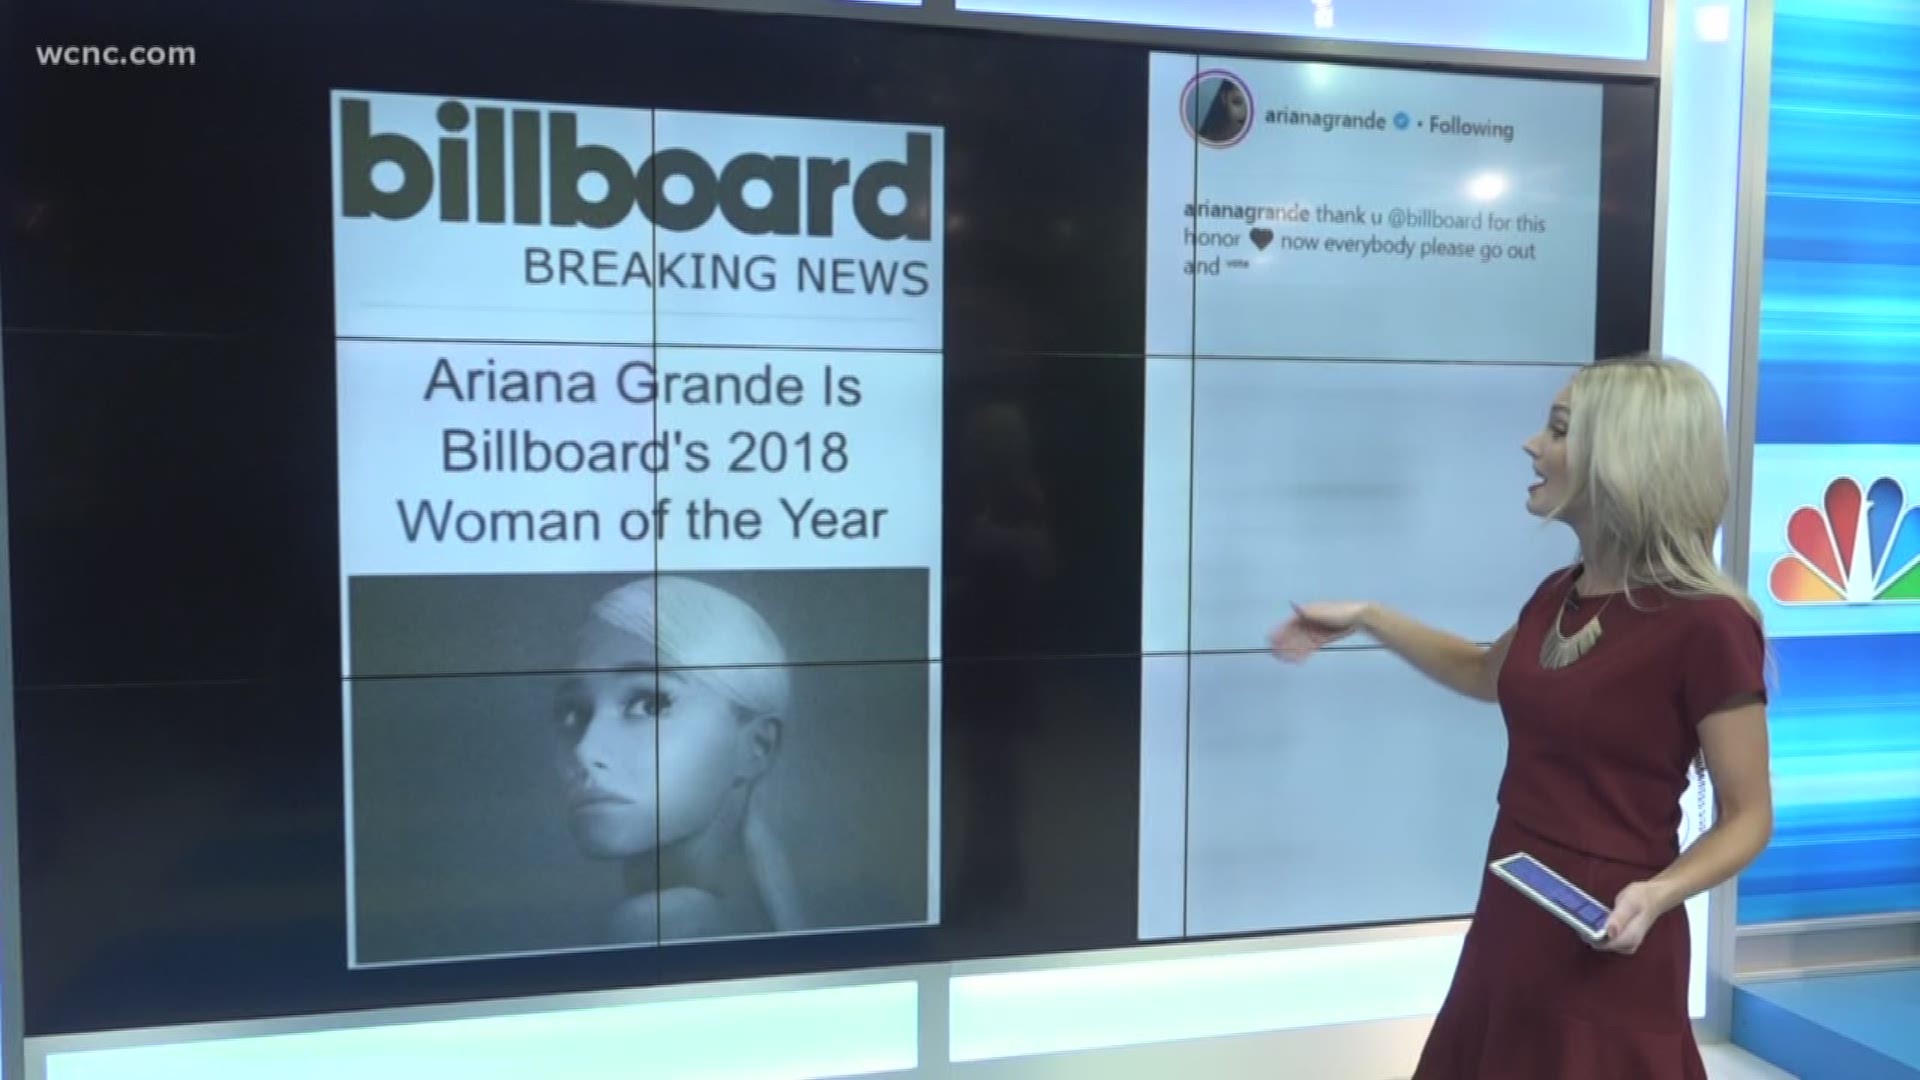 Ariana Grande's album "Sweetener" was the most downloaded for a female artist ever. Now, she's been named Billboard's 2018 Woman of the Year, putting her in the likes of Madonna, Lady Gaga and Taylor Swift.